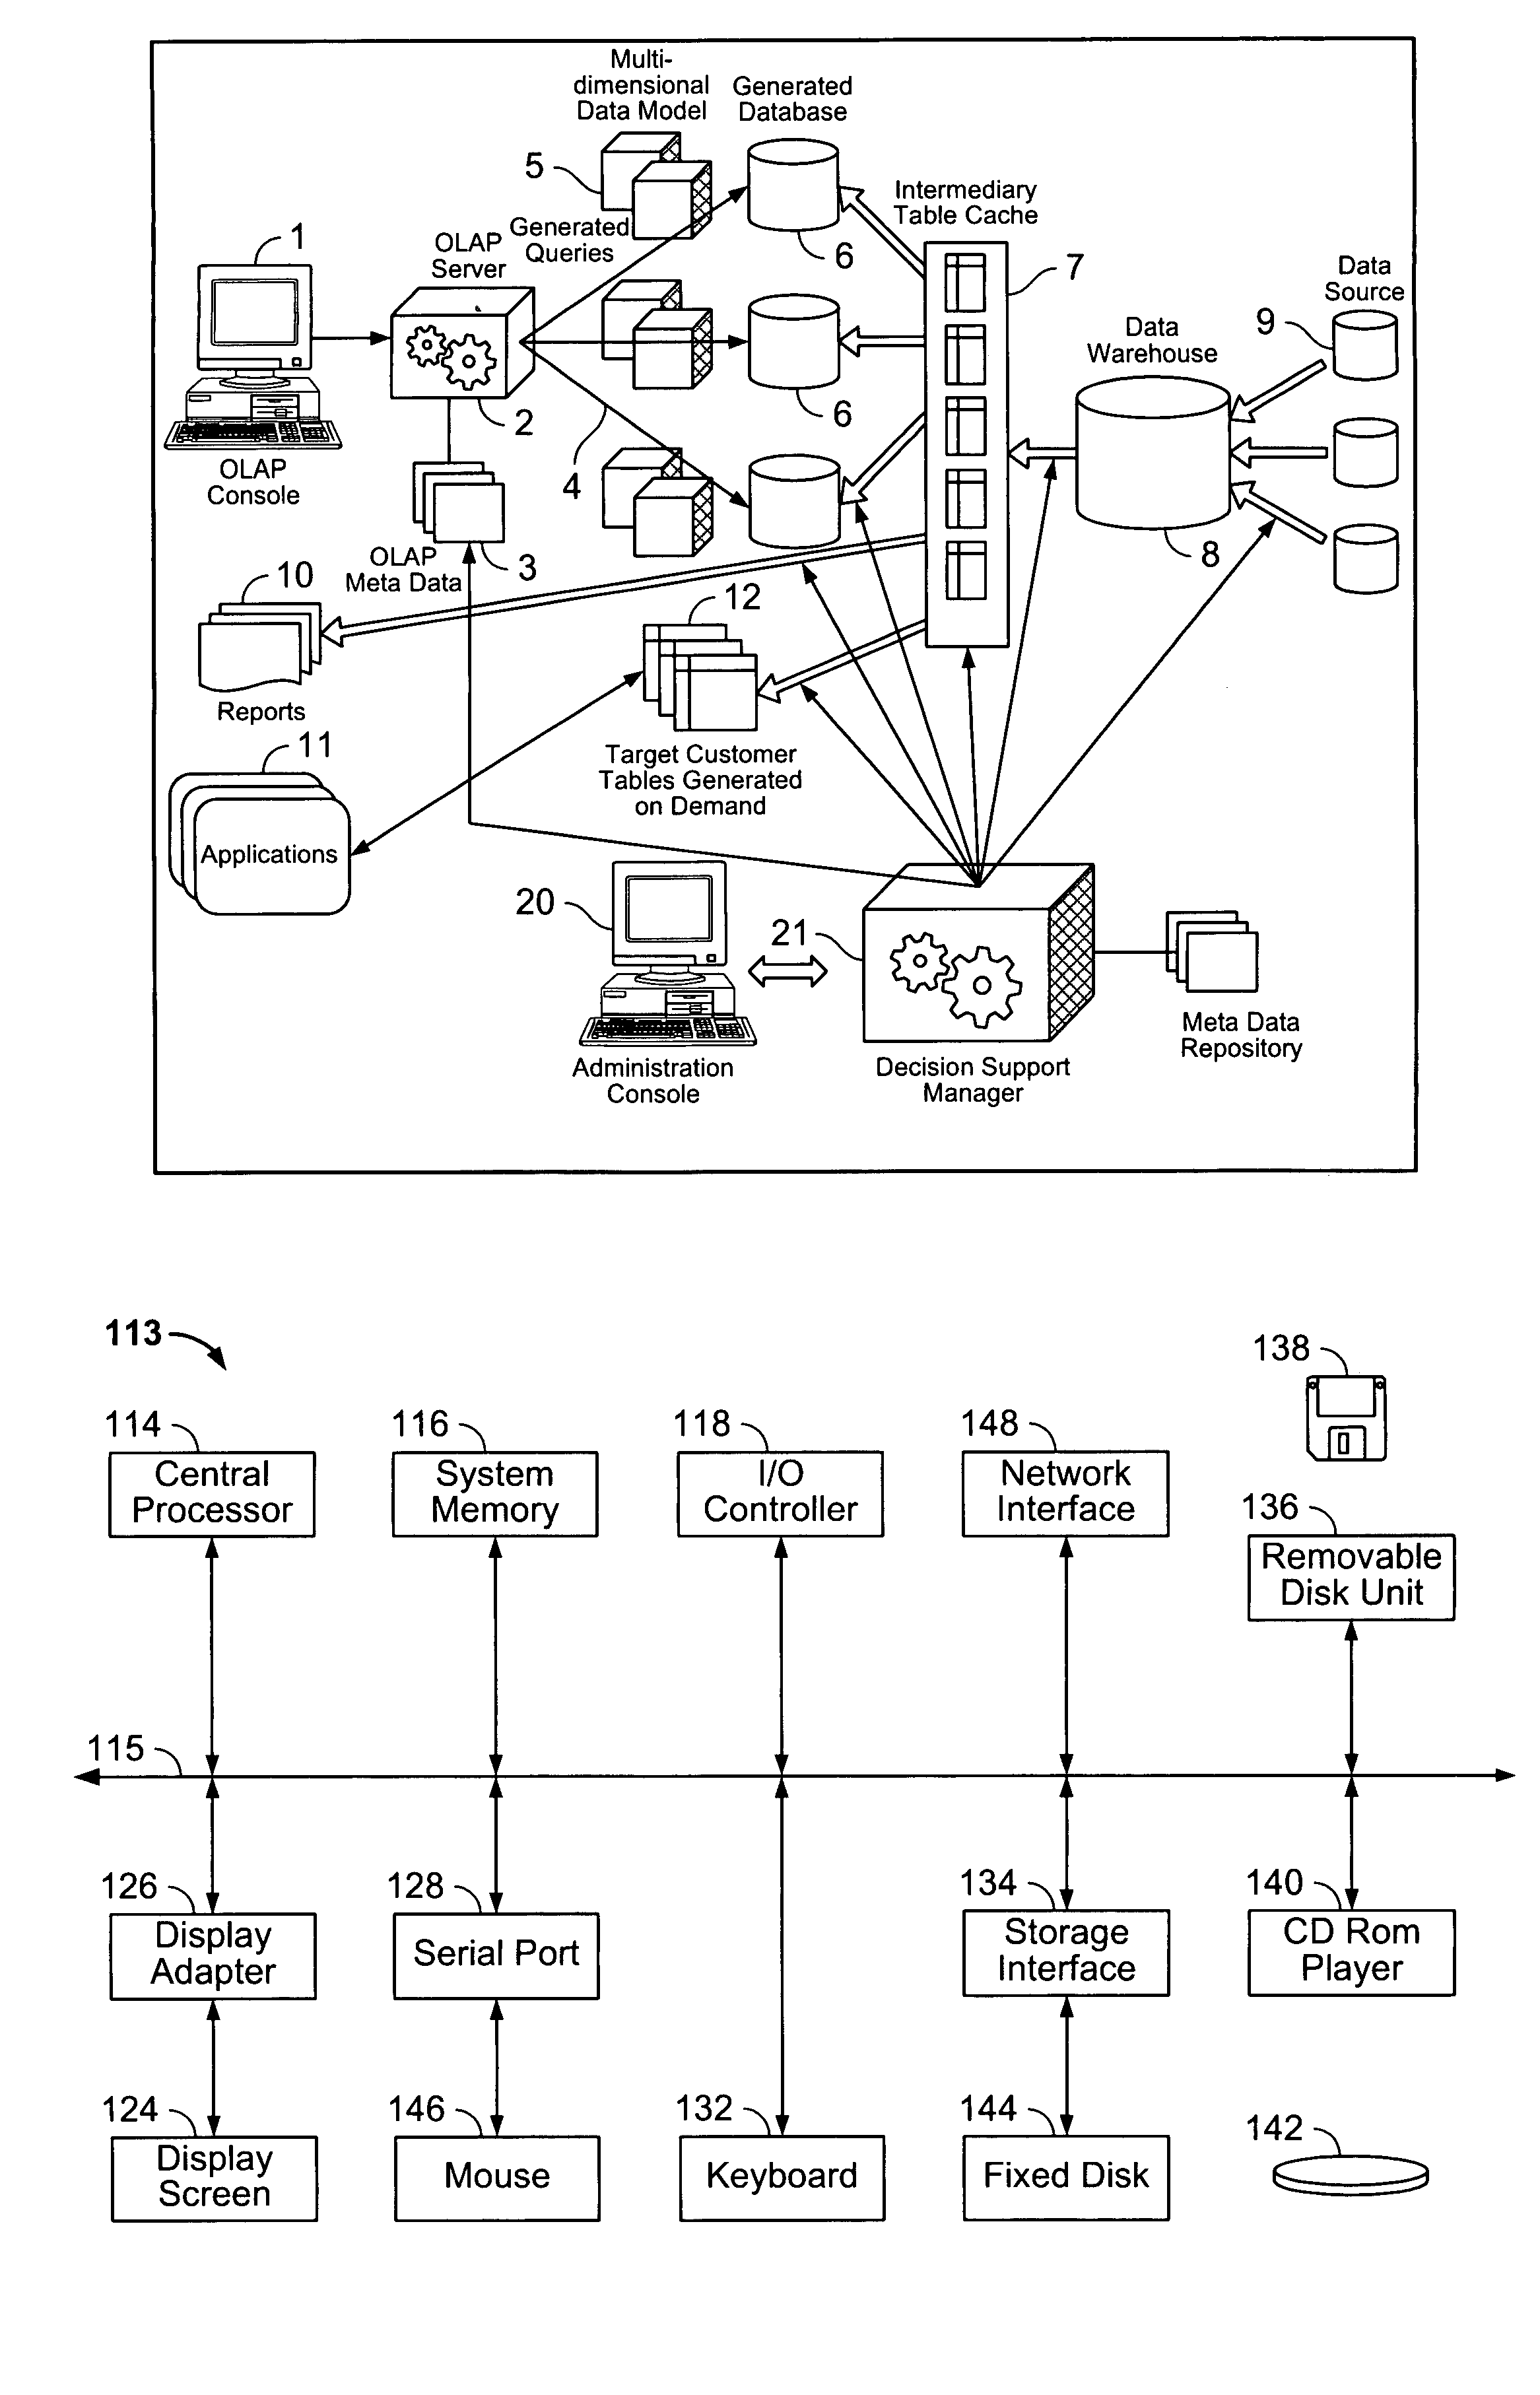 Method for visualizing information in a data warehousing environment